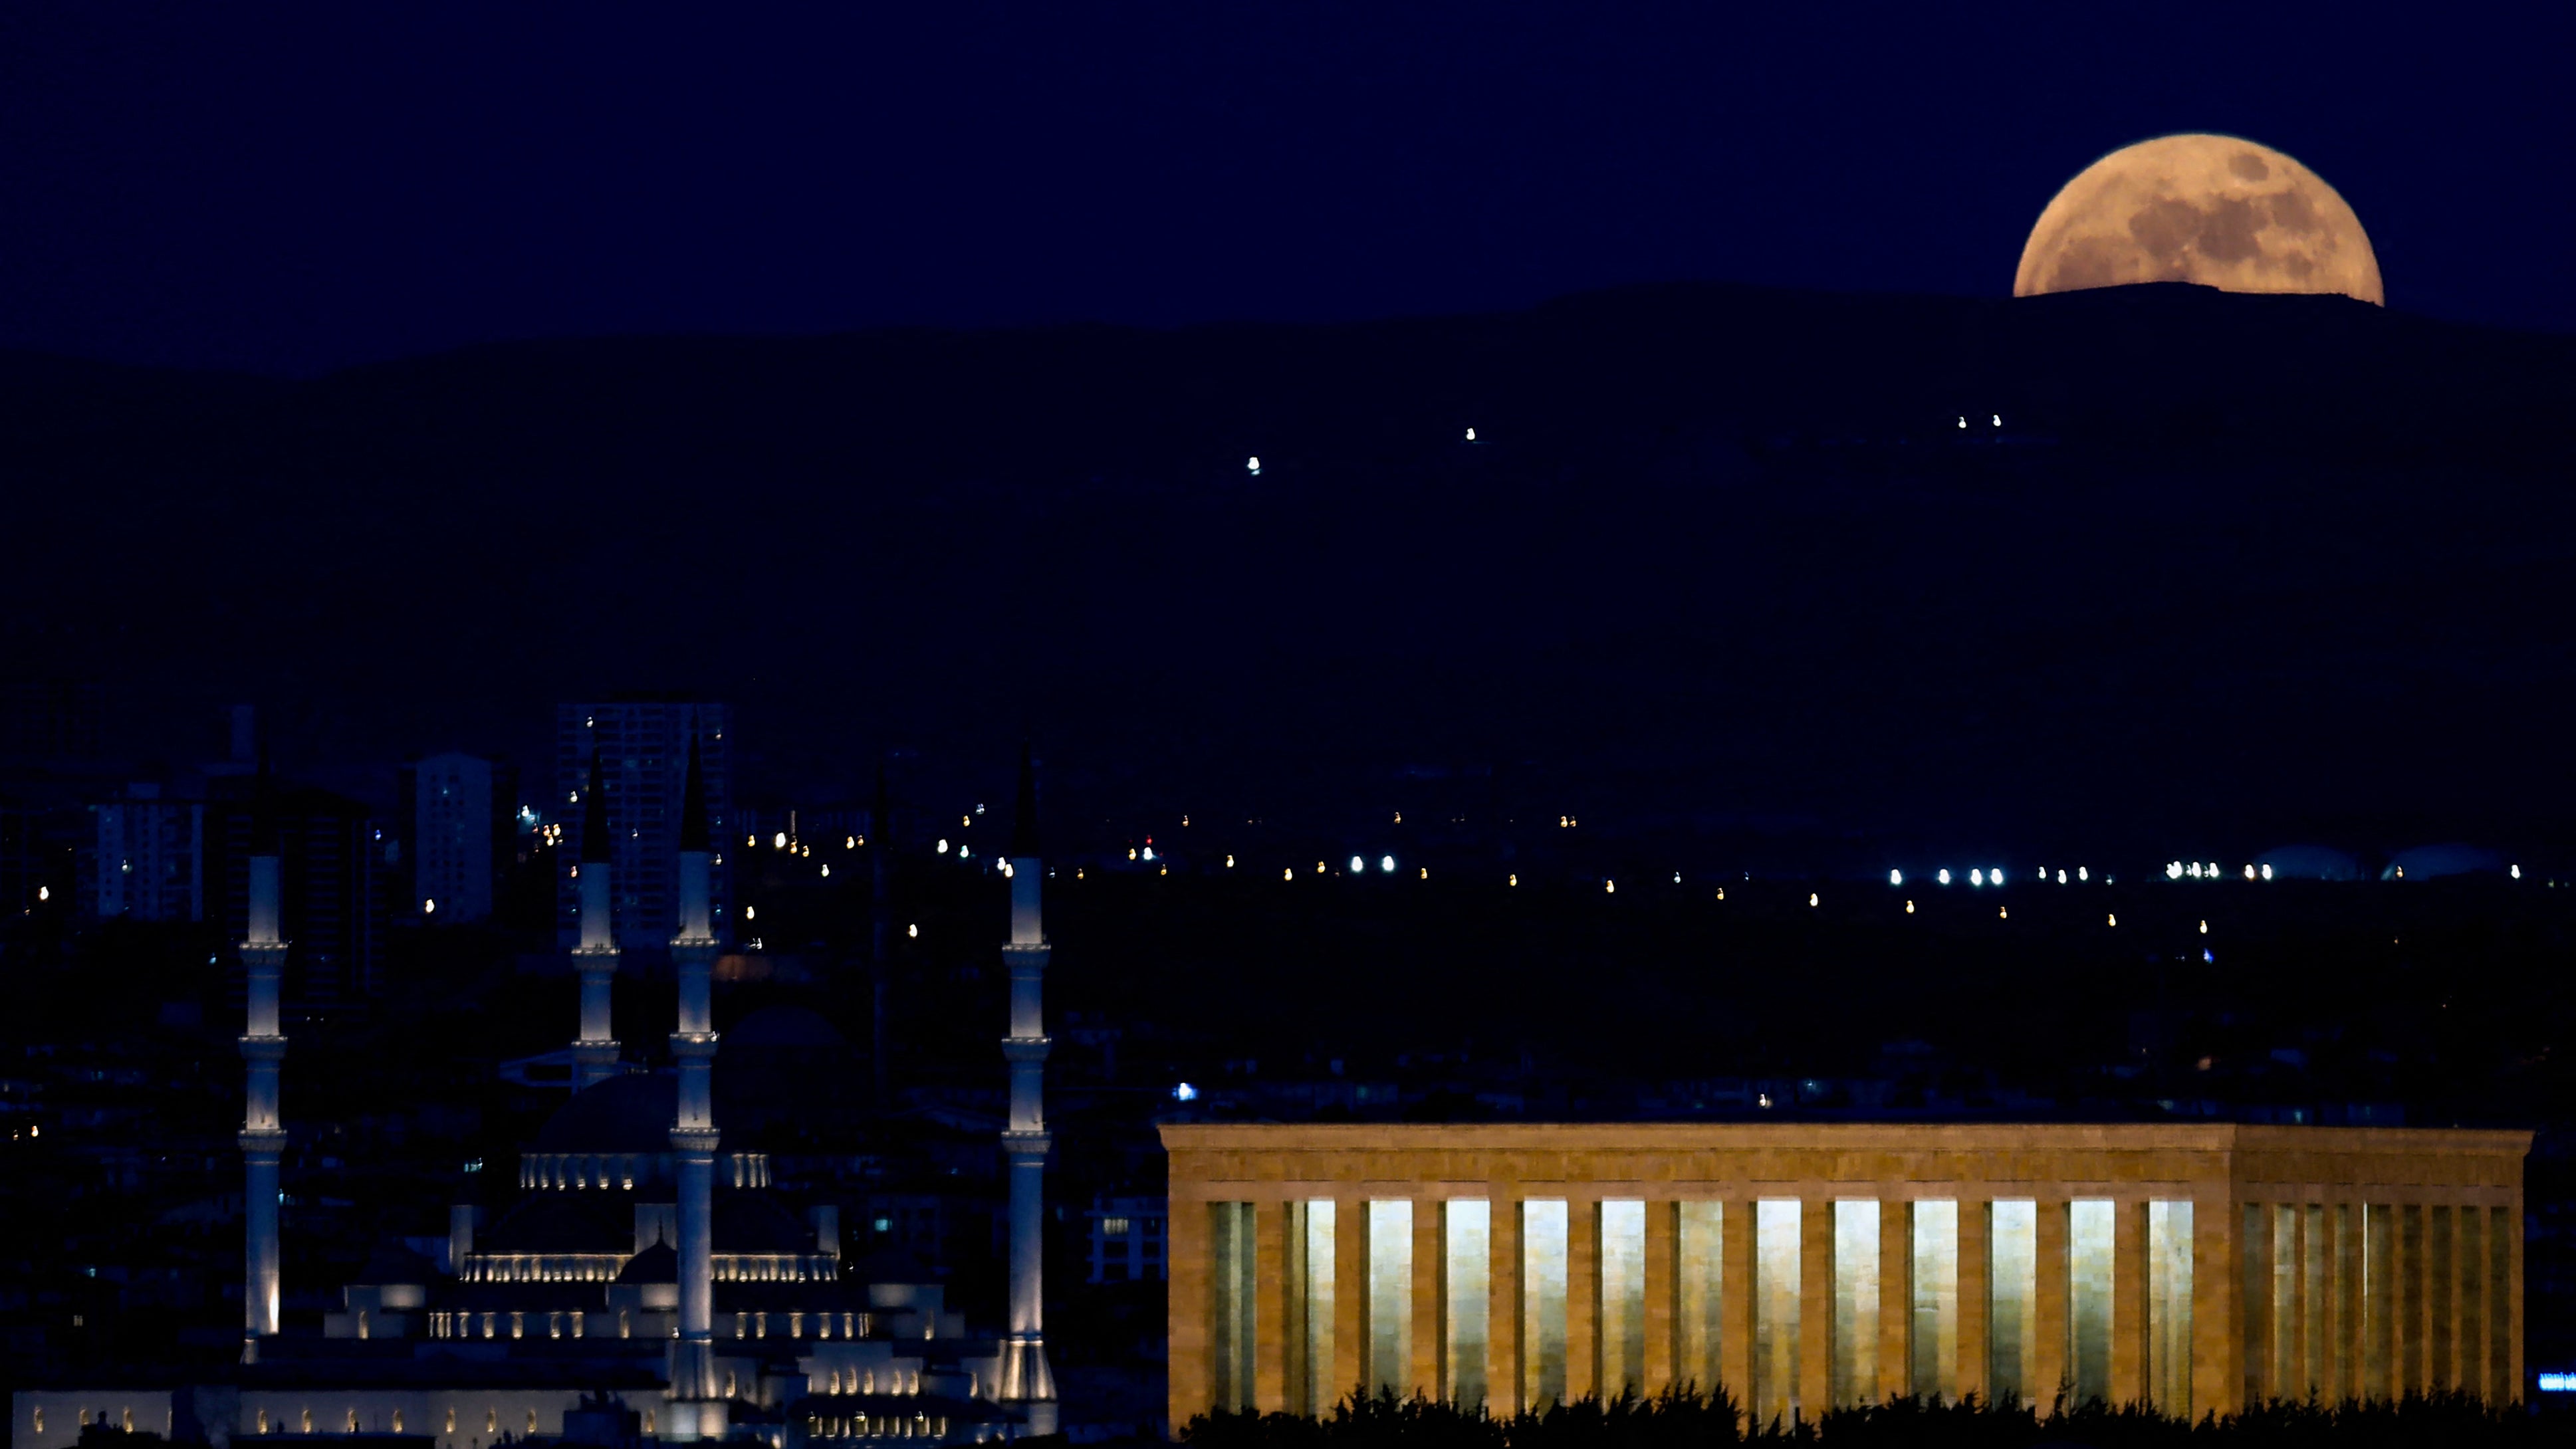 The “Super Blood Moon” rises over the Anitkabir and the Kocatepe Mosque in Ankara, Turkey on the evening of 26 May, 2021